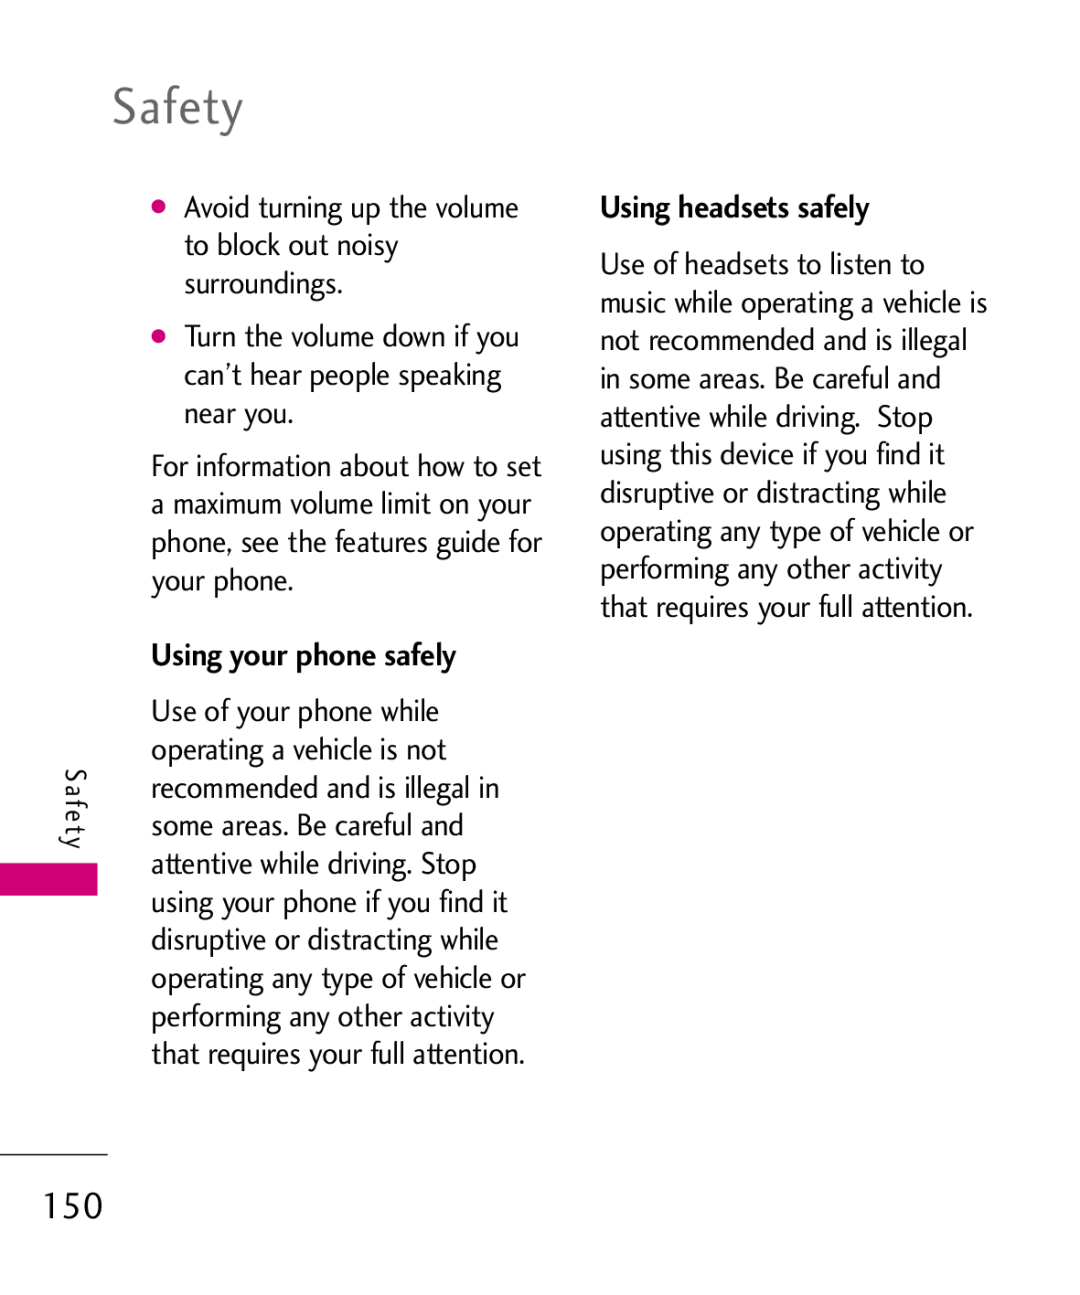 LG Electronics MMBB0379501 Safety, Using headsets safely, Avoid turning up the volume to block out noisy surroundings 